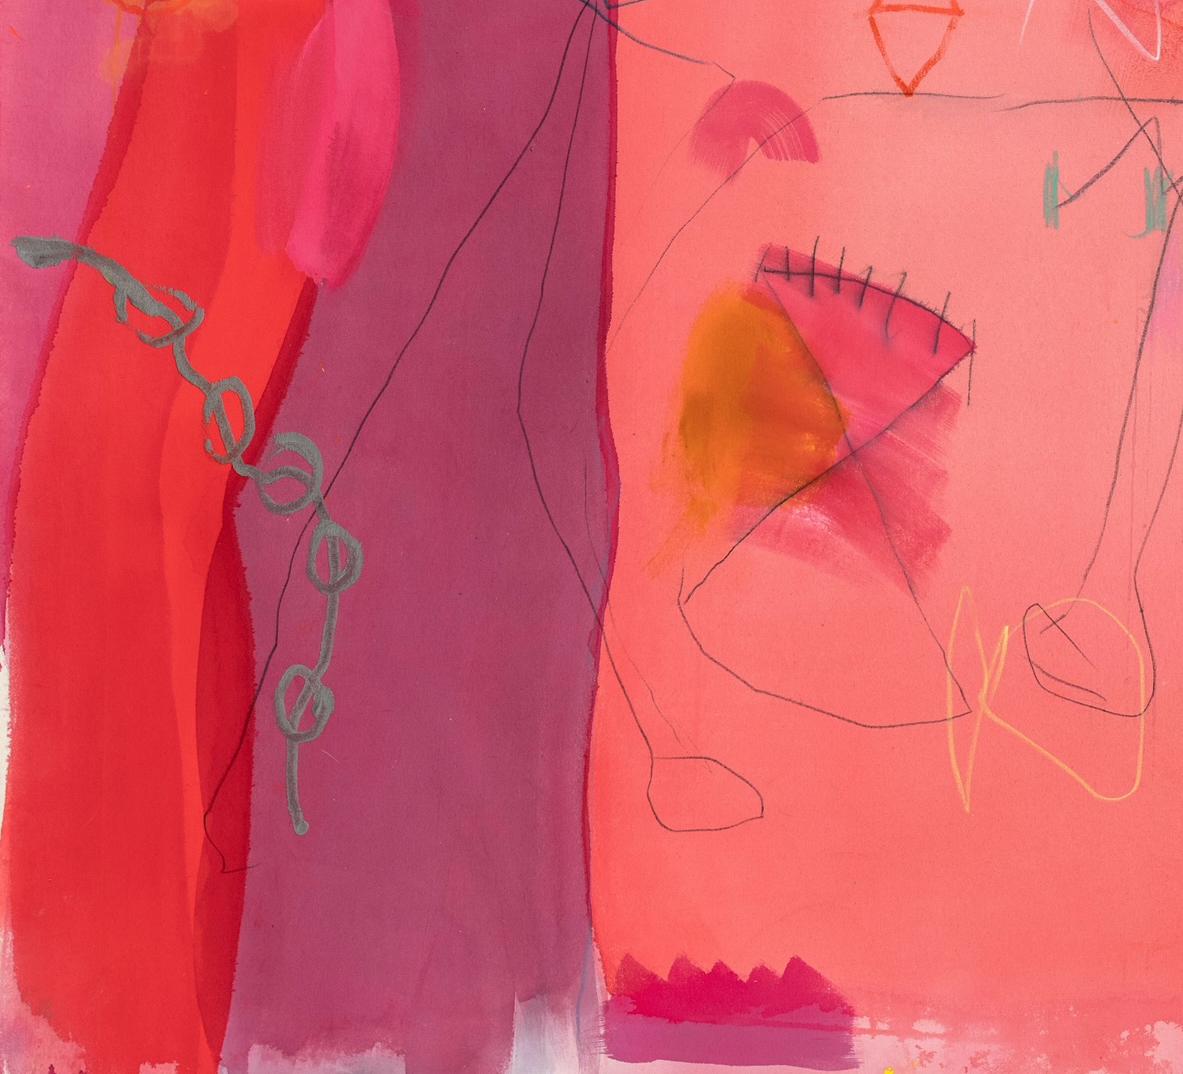 Gestural Abstraction_Pink/Red_Mixed Media_Pearlman's Inner World, Jane Booth For Sale 2